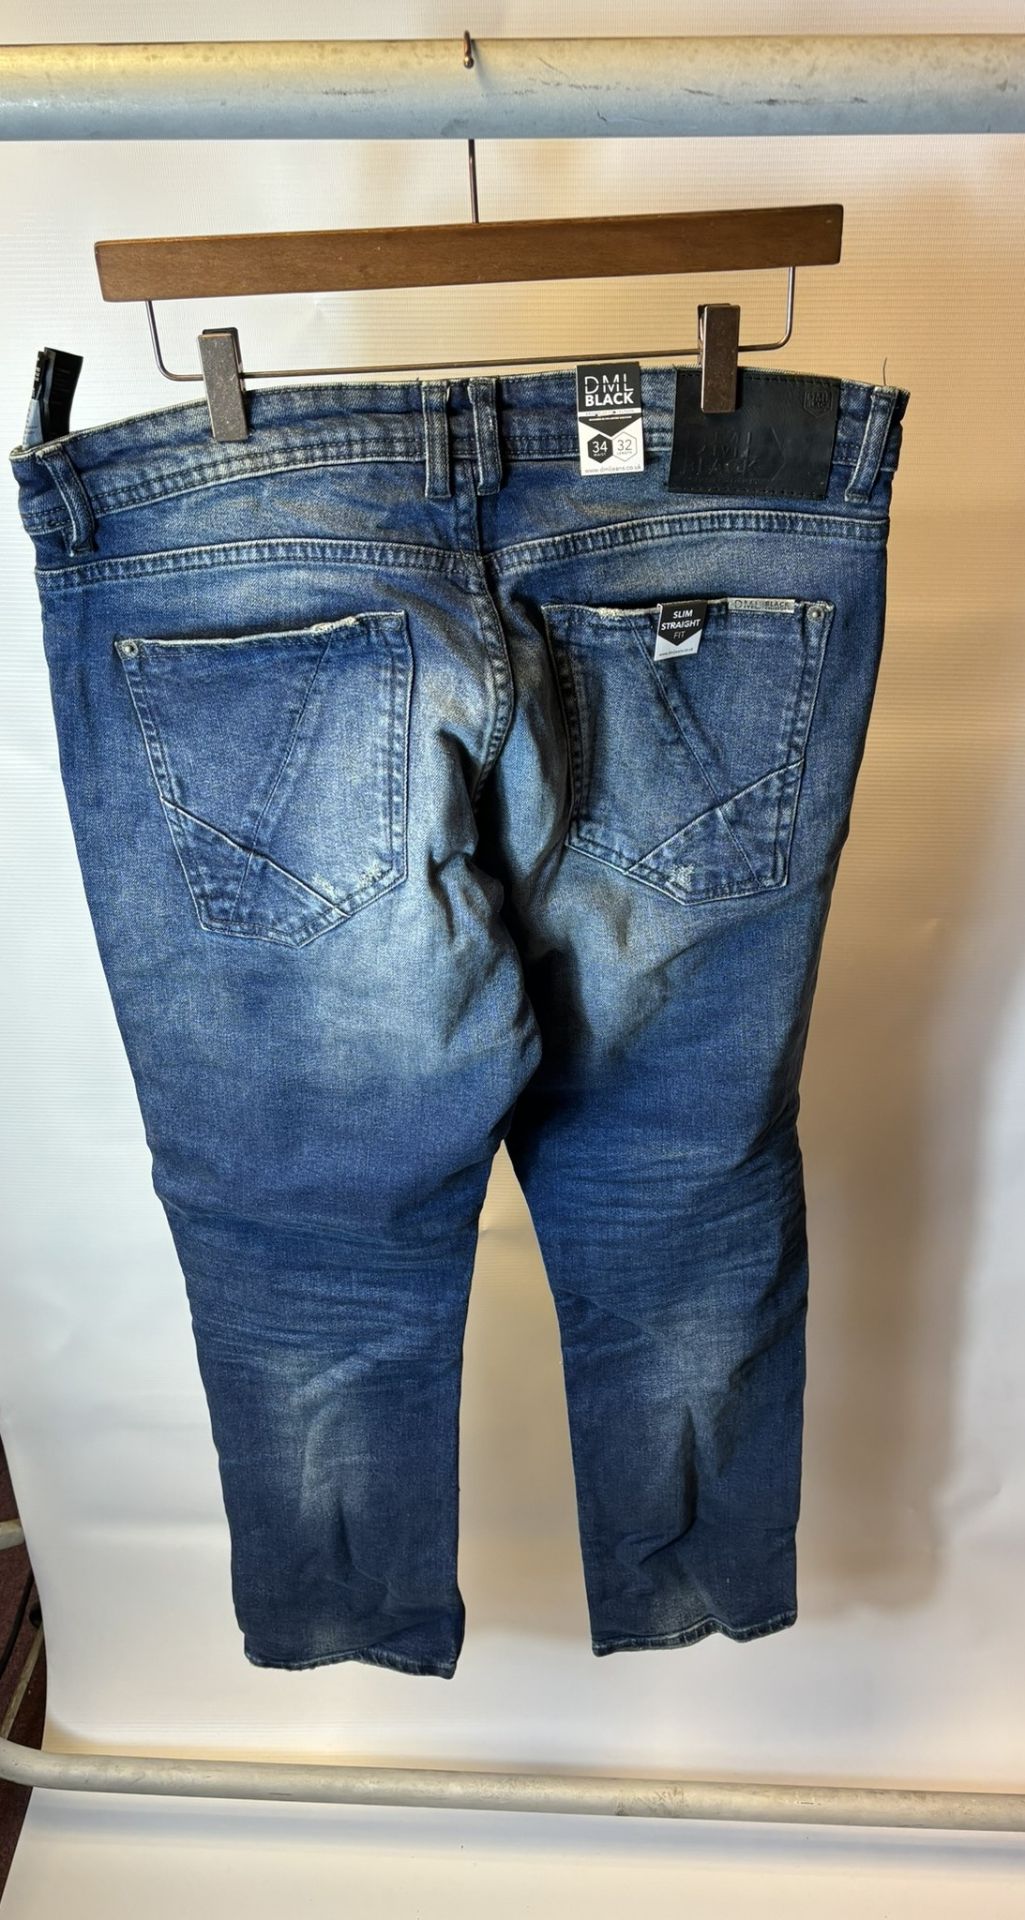 13 x Pairs Of various Sized DML Jeans Prophecy & Voyage Blue Jeans - Image 32 of 39